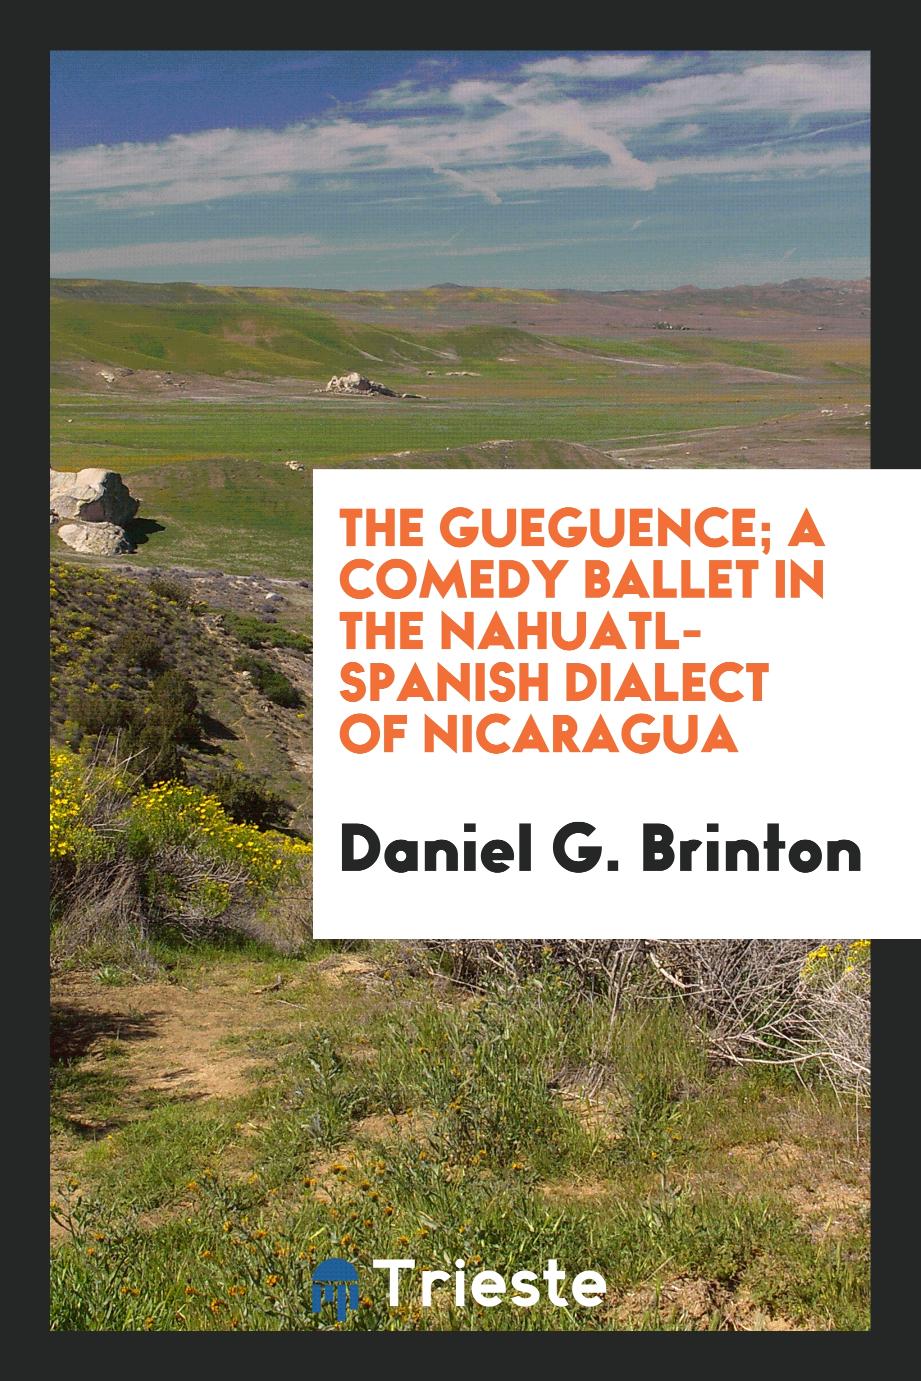 The Gueguence; a comedy ballet in the Nahuatl-Spanish dialect of Nicaragua